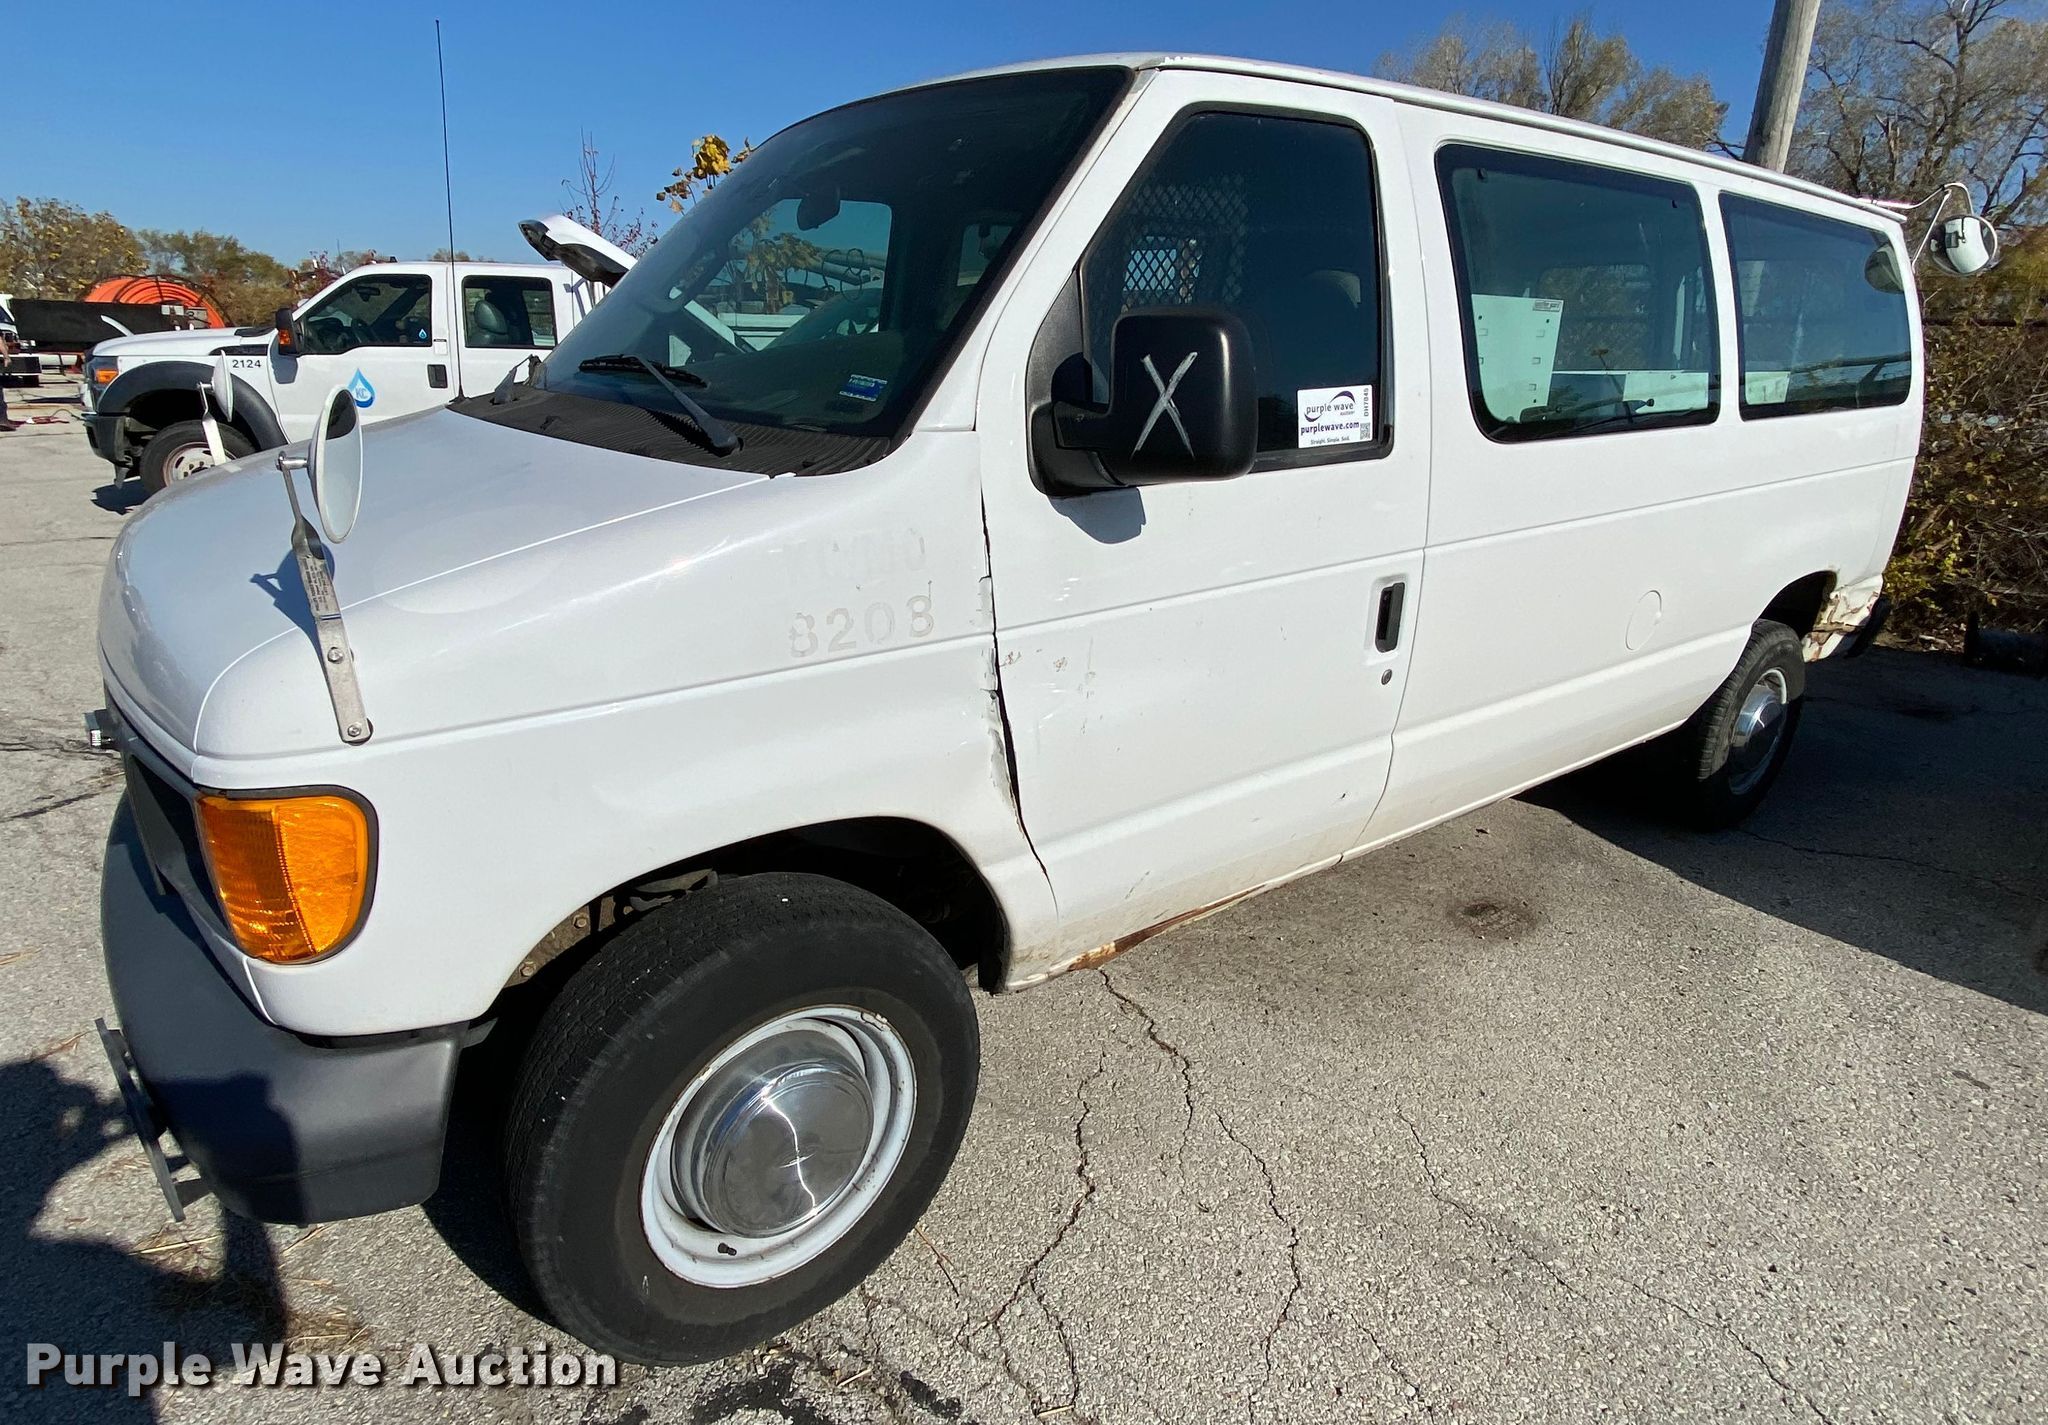 2006 Ford E250 van in Kansas City, MO | Item DH7045 sold | Purple Wave